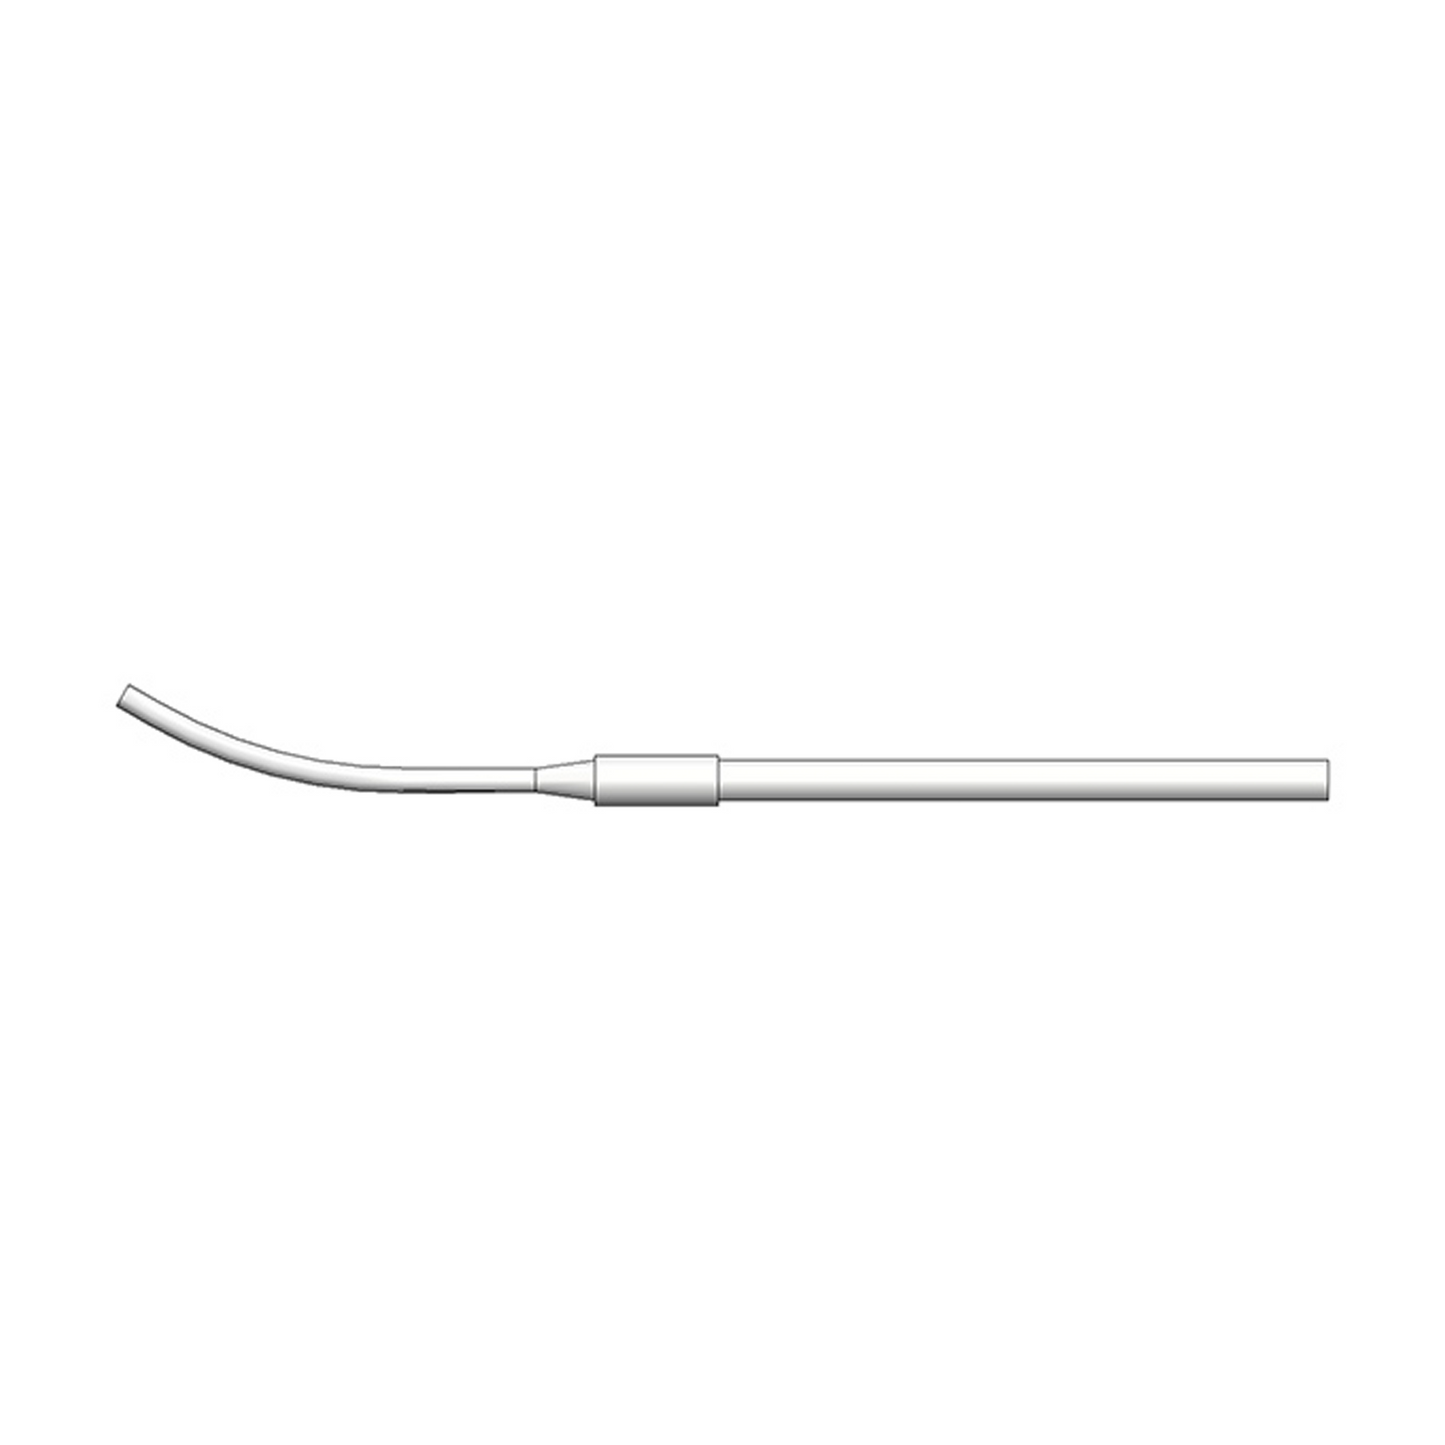 Hakko Products_ B5272 Feed pipe assembly 0.6 - 0.65mm_ Soldering Accessories_ Hakko Products